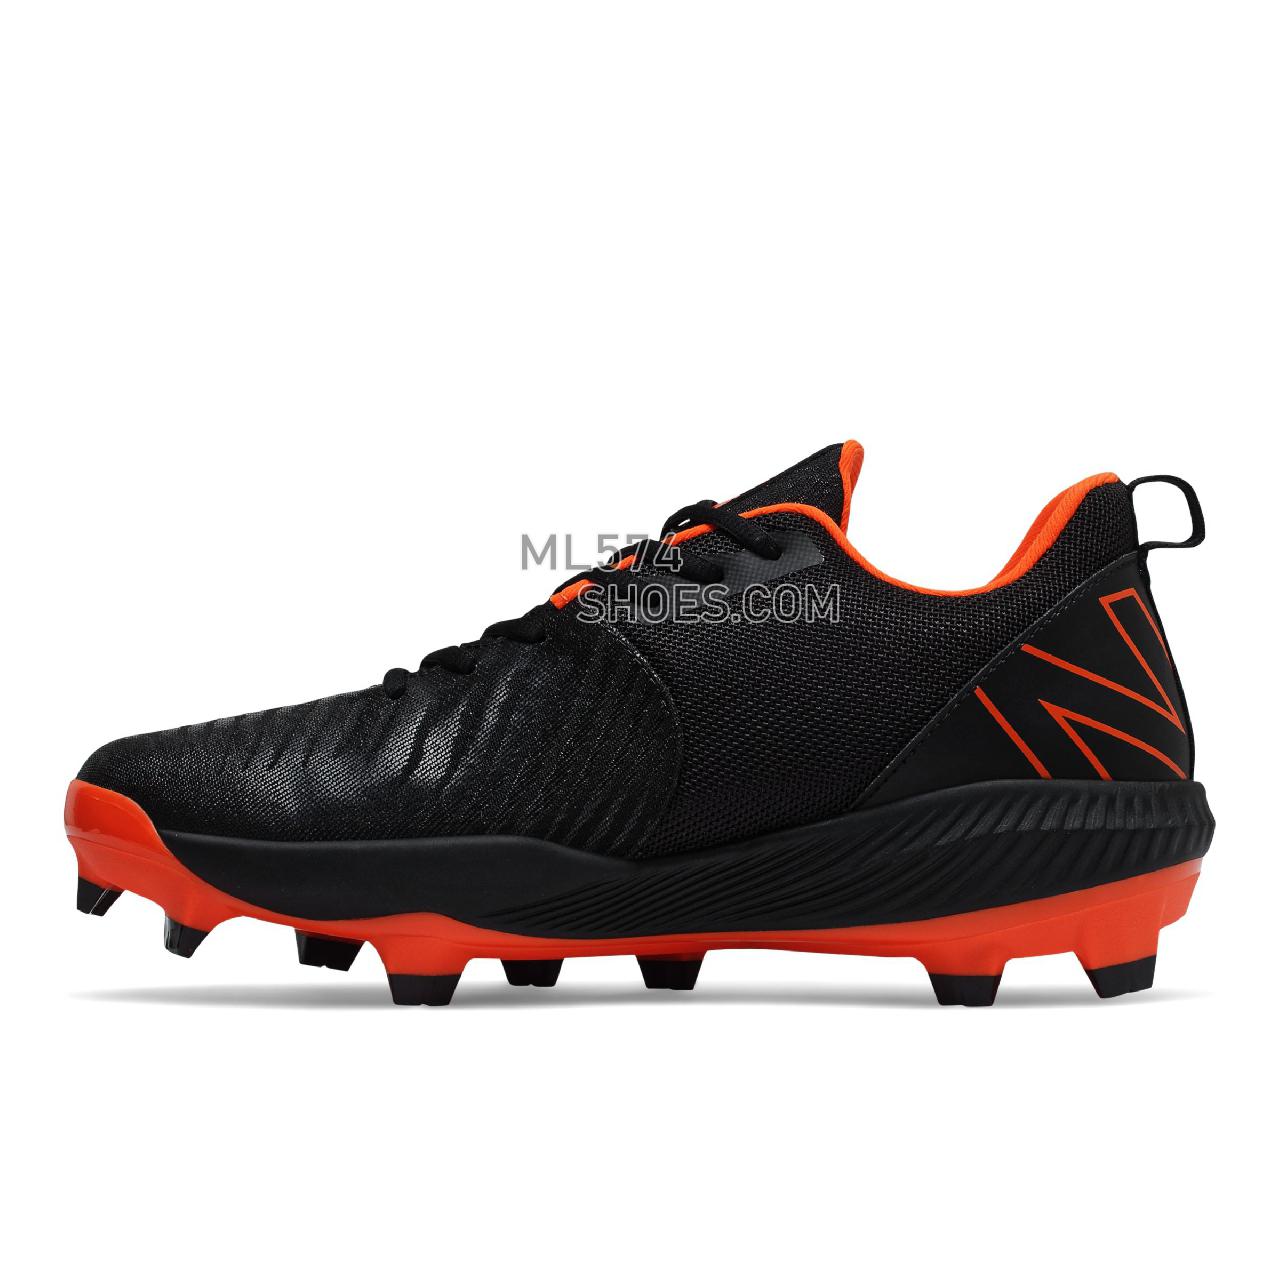 New Balance FuelCell 4040 v6 Molded - Men's Mid-Cut Baseball Cleats - Black with Orange - PL4040O6